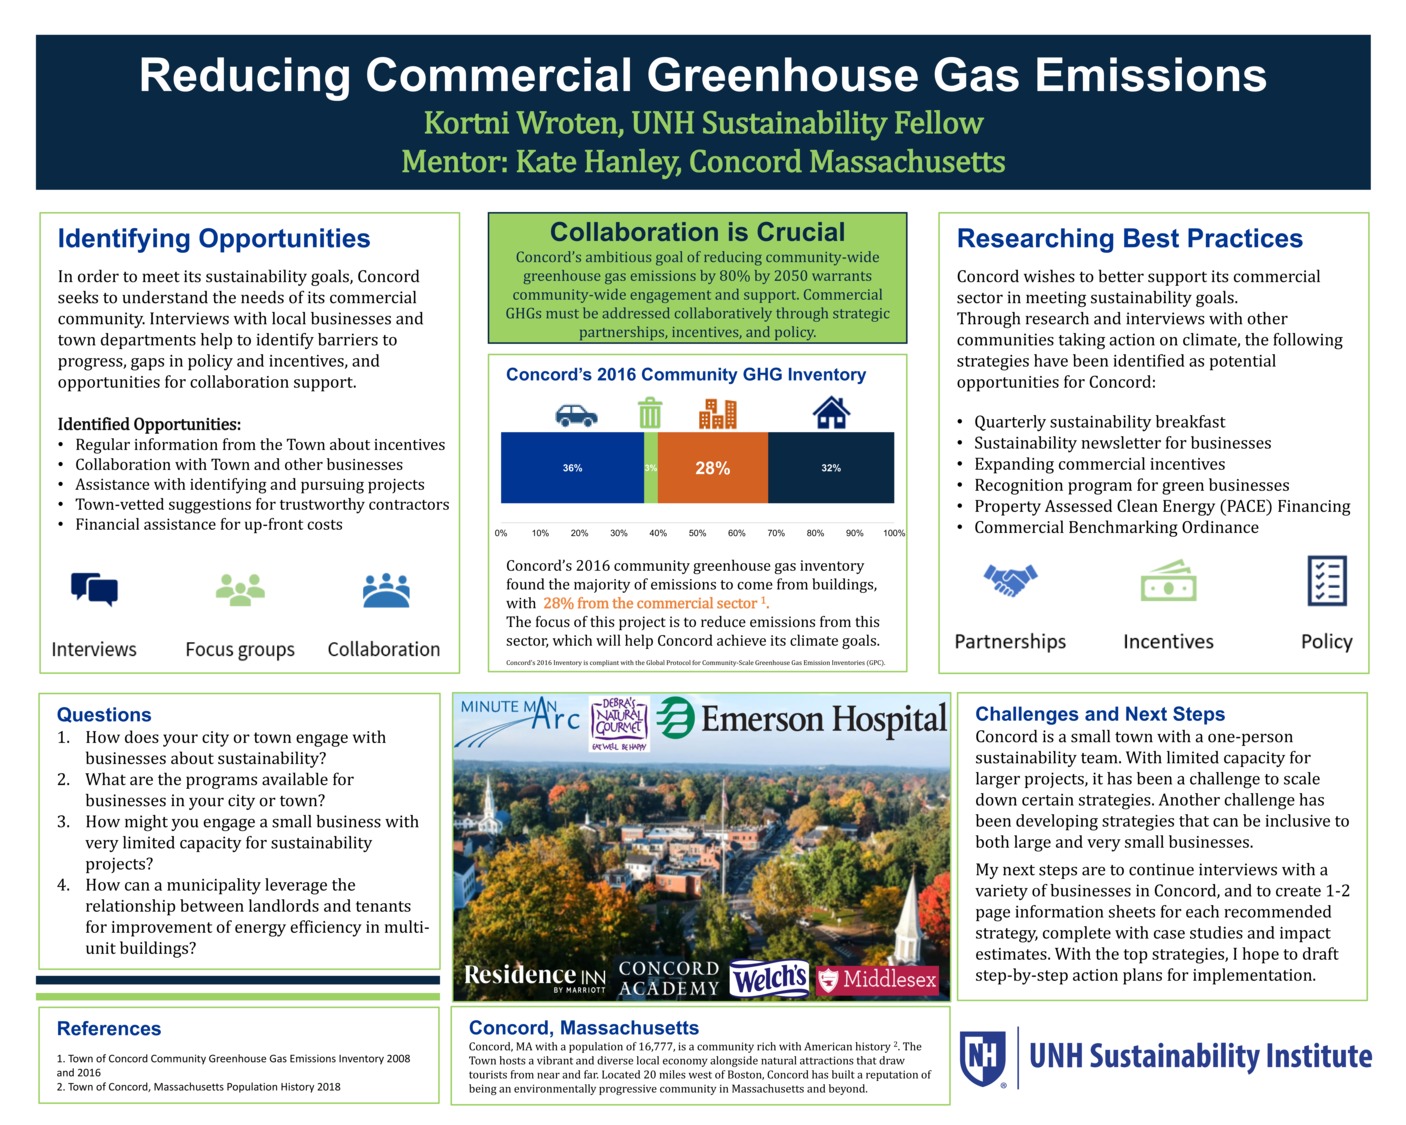 Reducing Commercial Ghg In Concord, Ma by kwroten